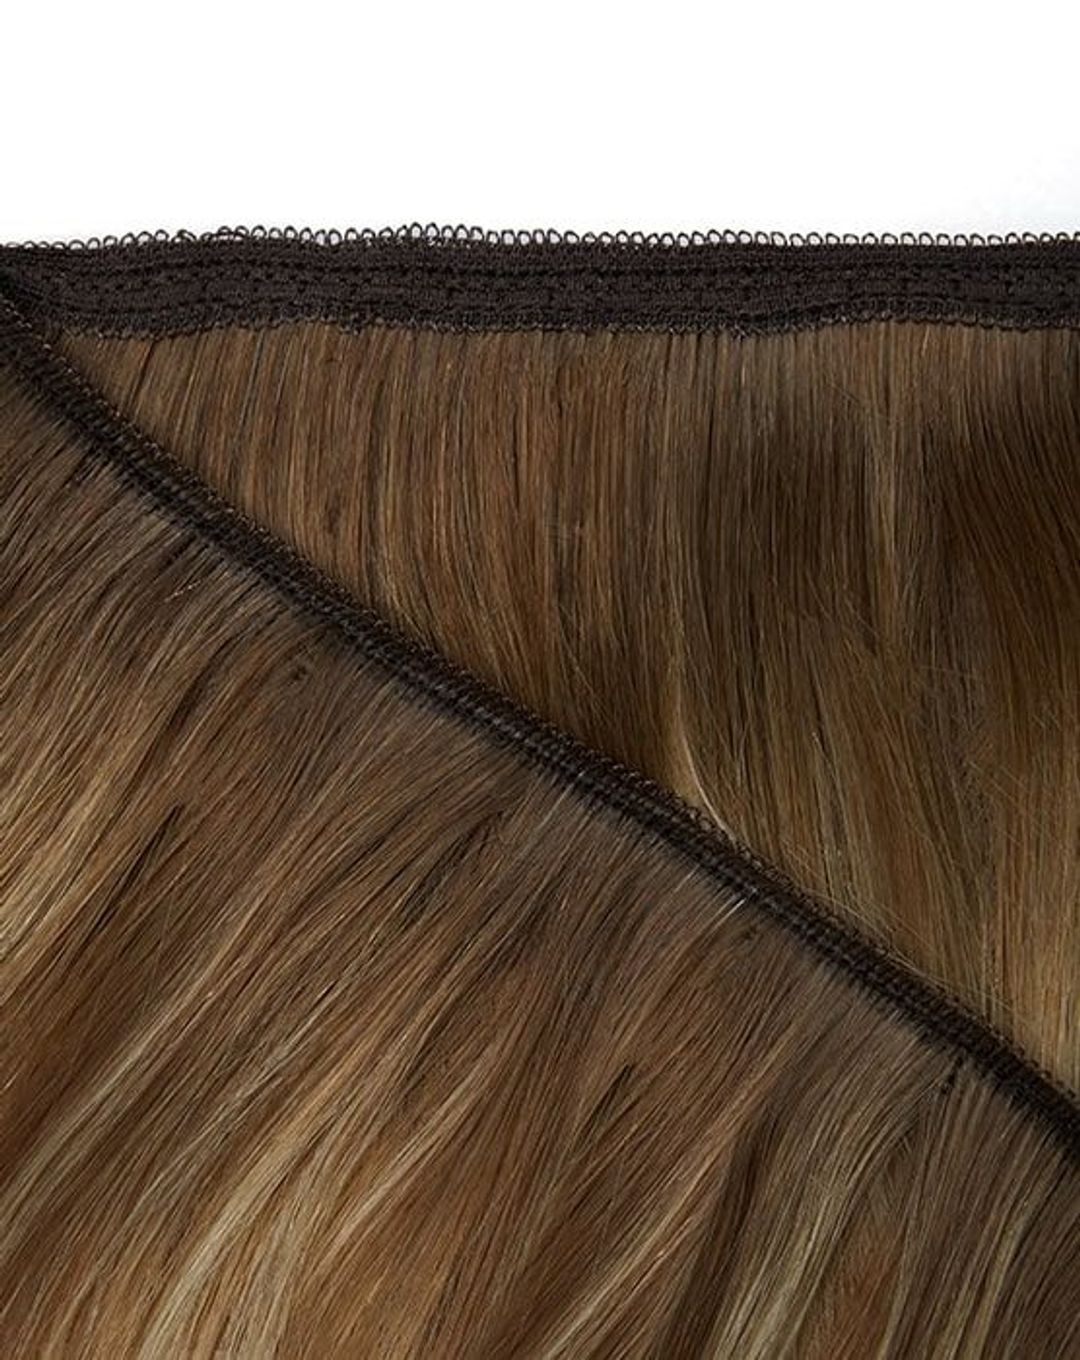 Beauty Works Gold Double Weft Extensions - Blondette,20"